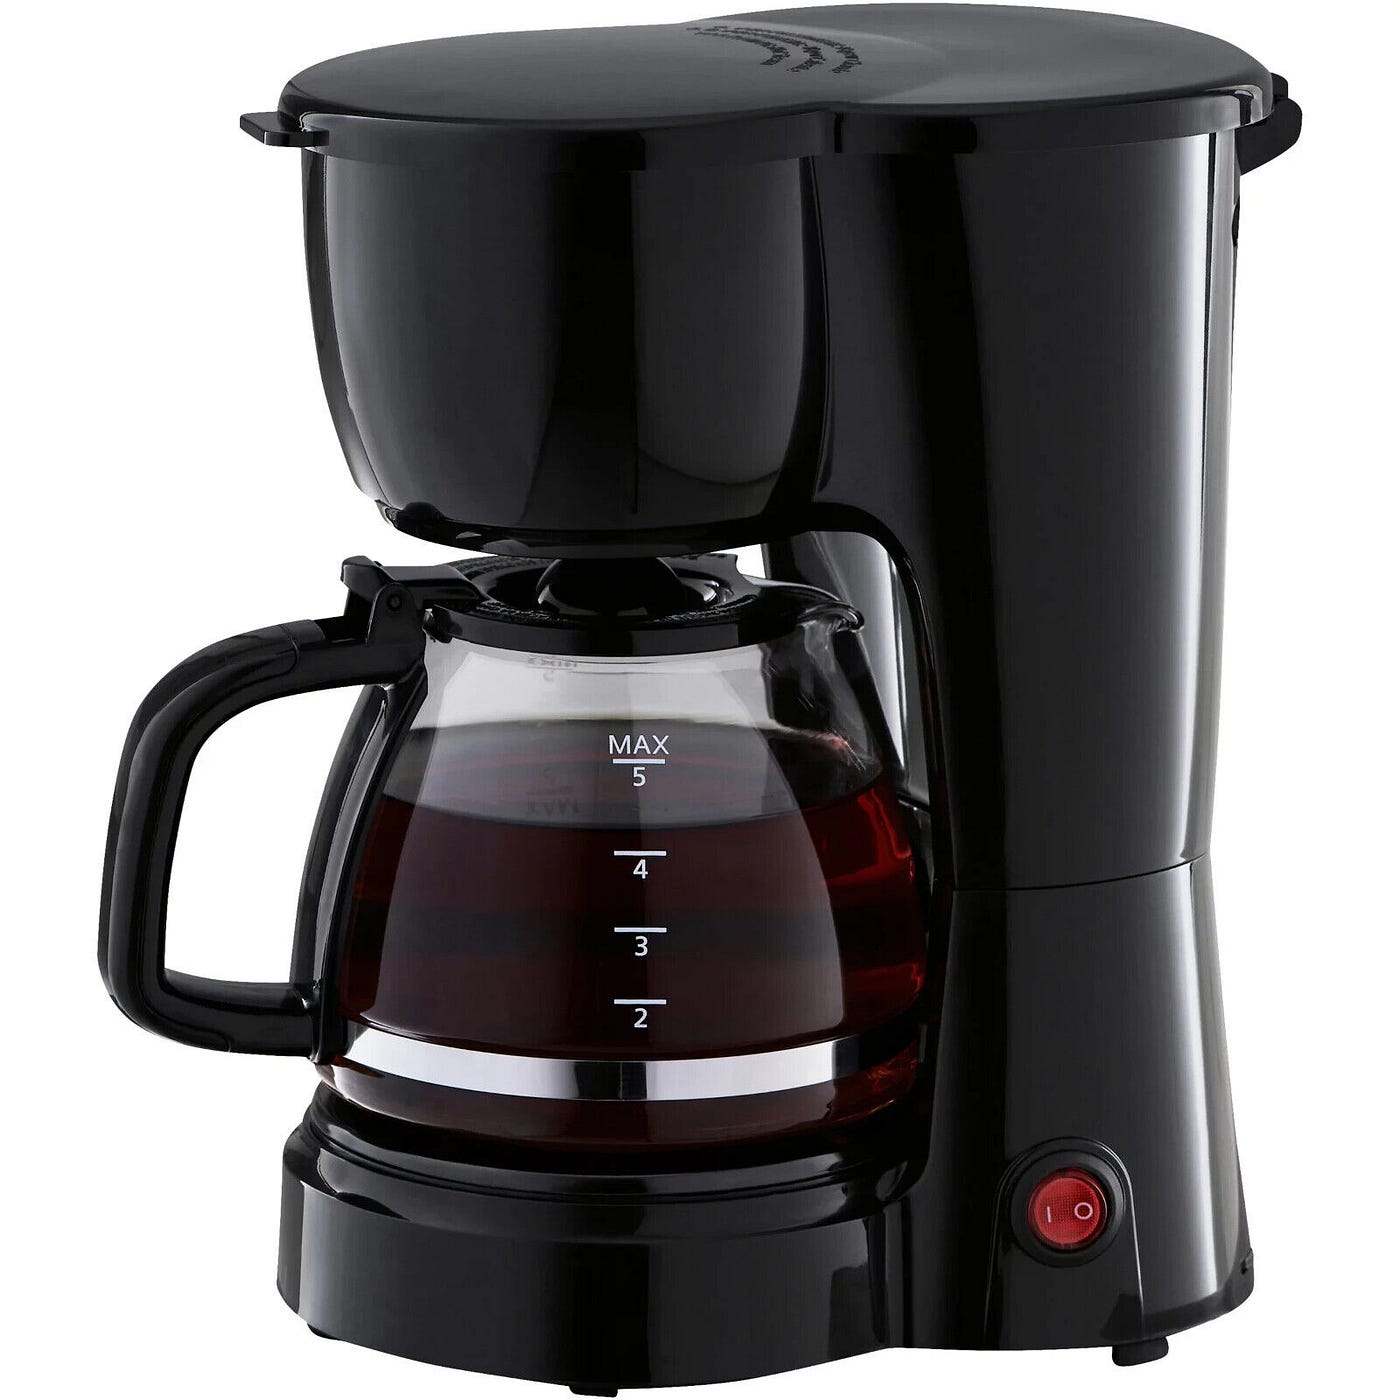 Top 5 Mr. Coffee Cup Coffee Makers You Should Buy, by Danielbrowntee